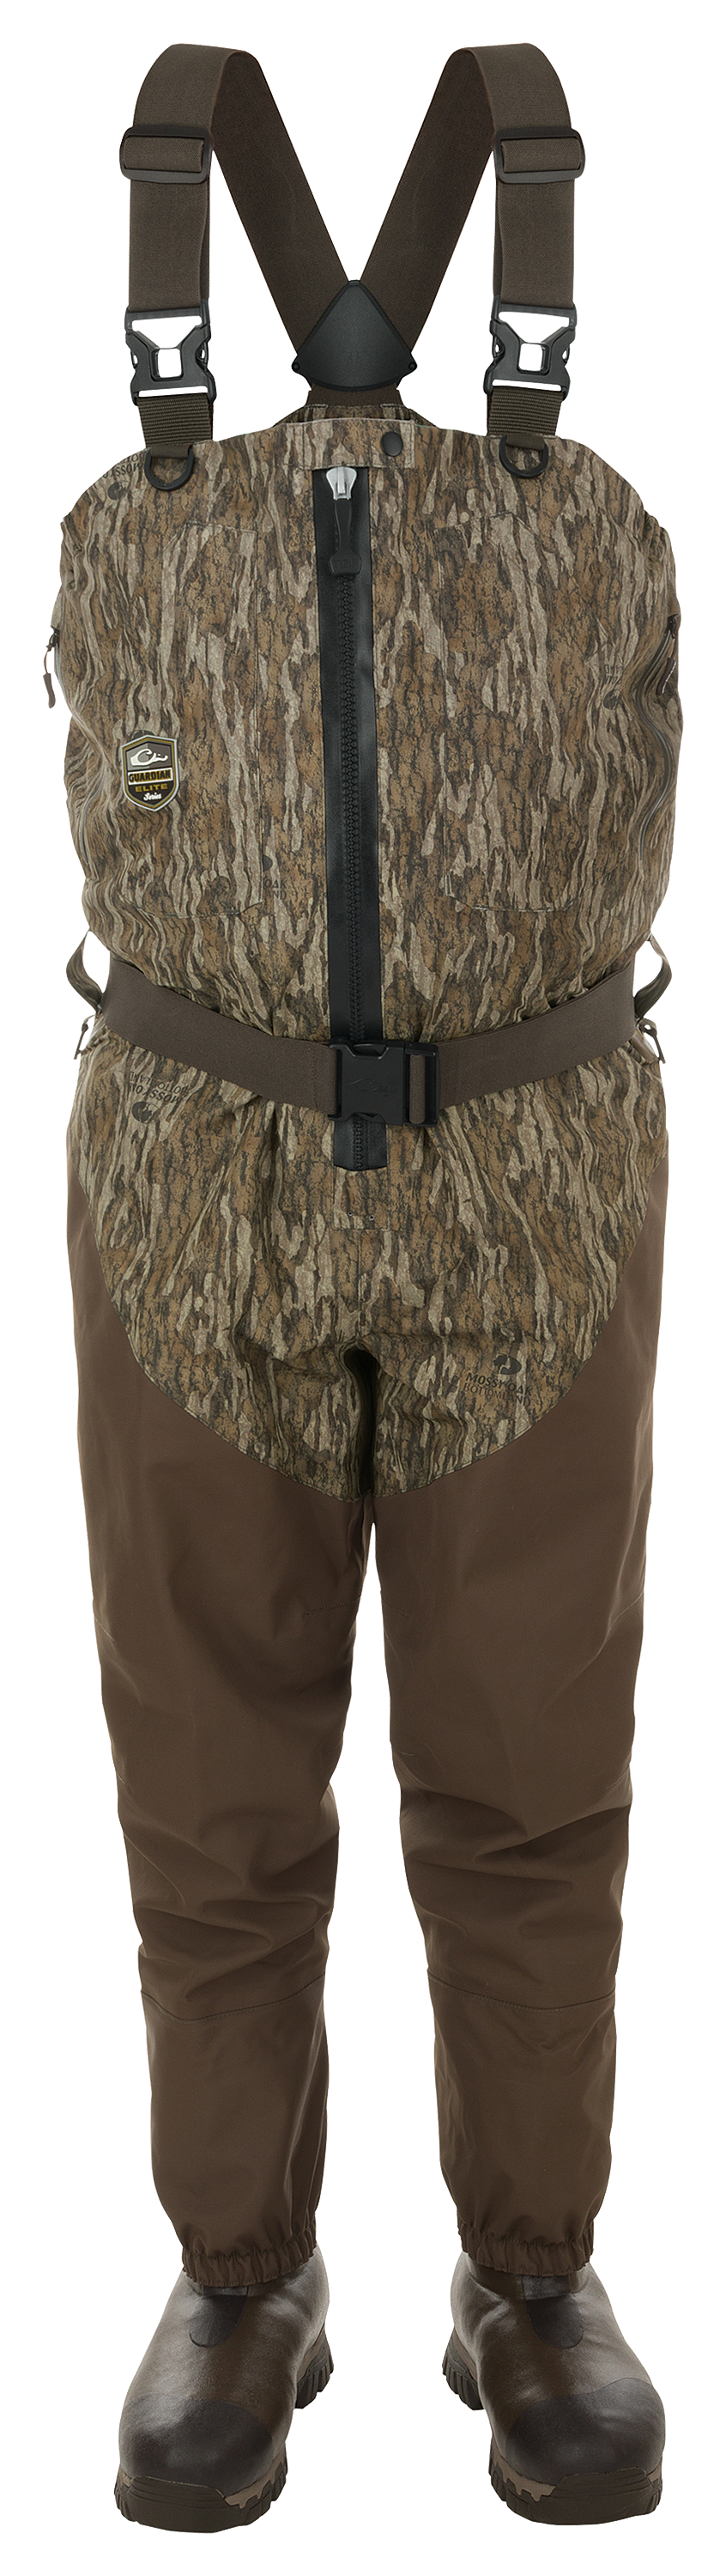 Drake Waterfowl Systems Guardian Elite Front Zip Breathable Waders for Men - Mossy Oak Bottomland - 12/Extra Large